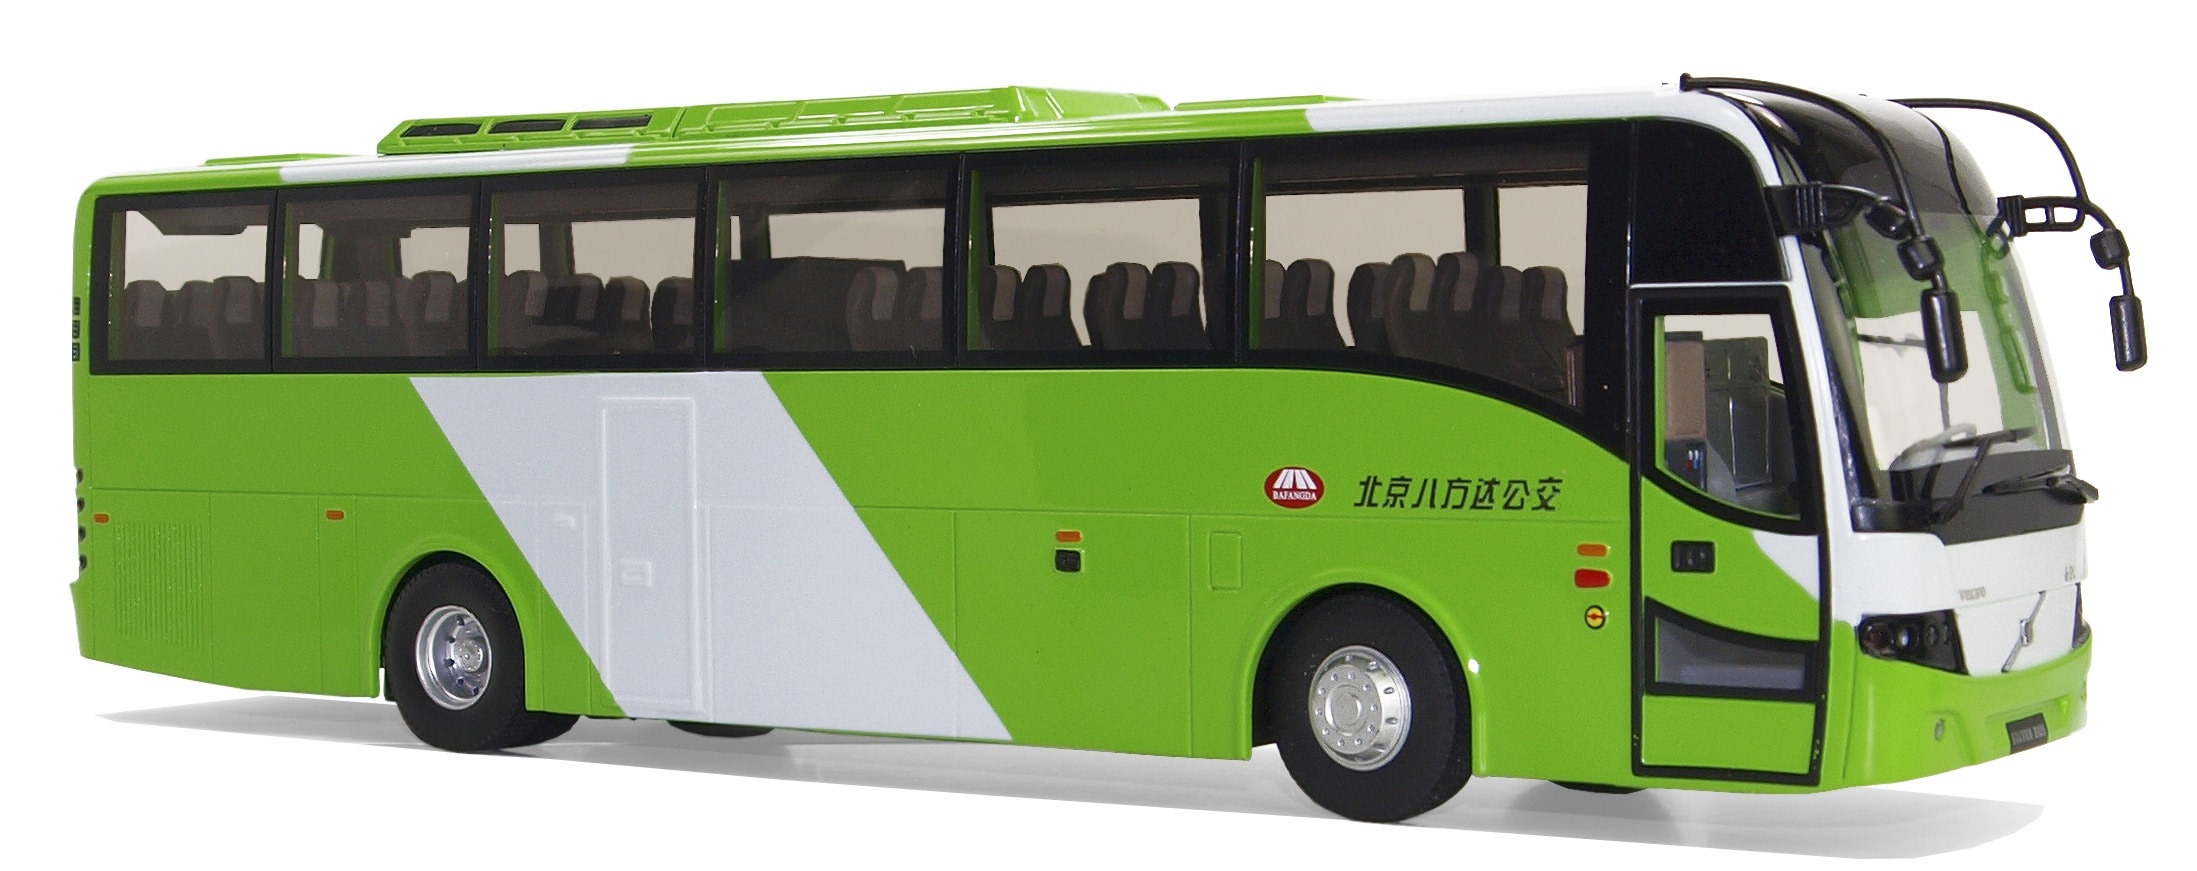 green and white bus